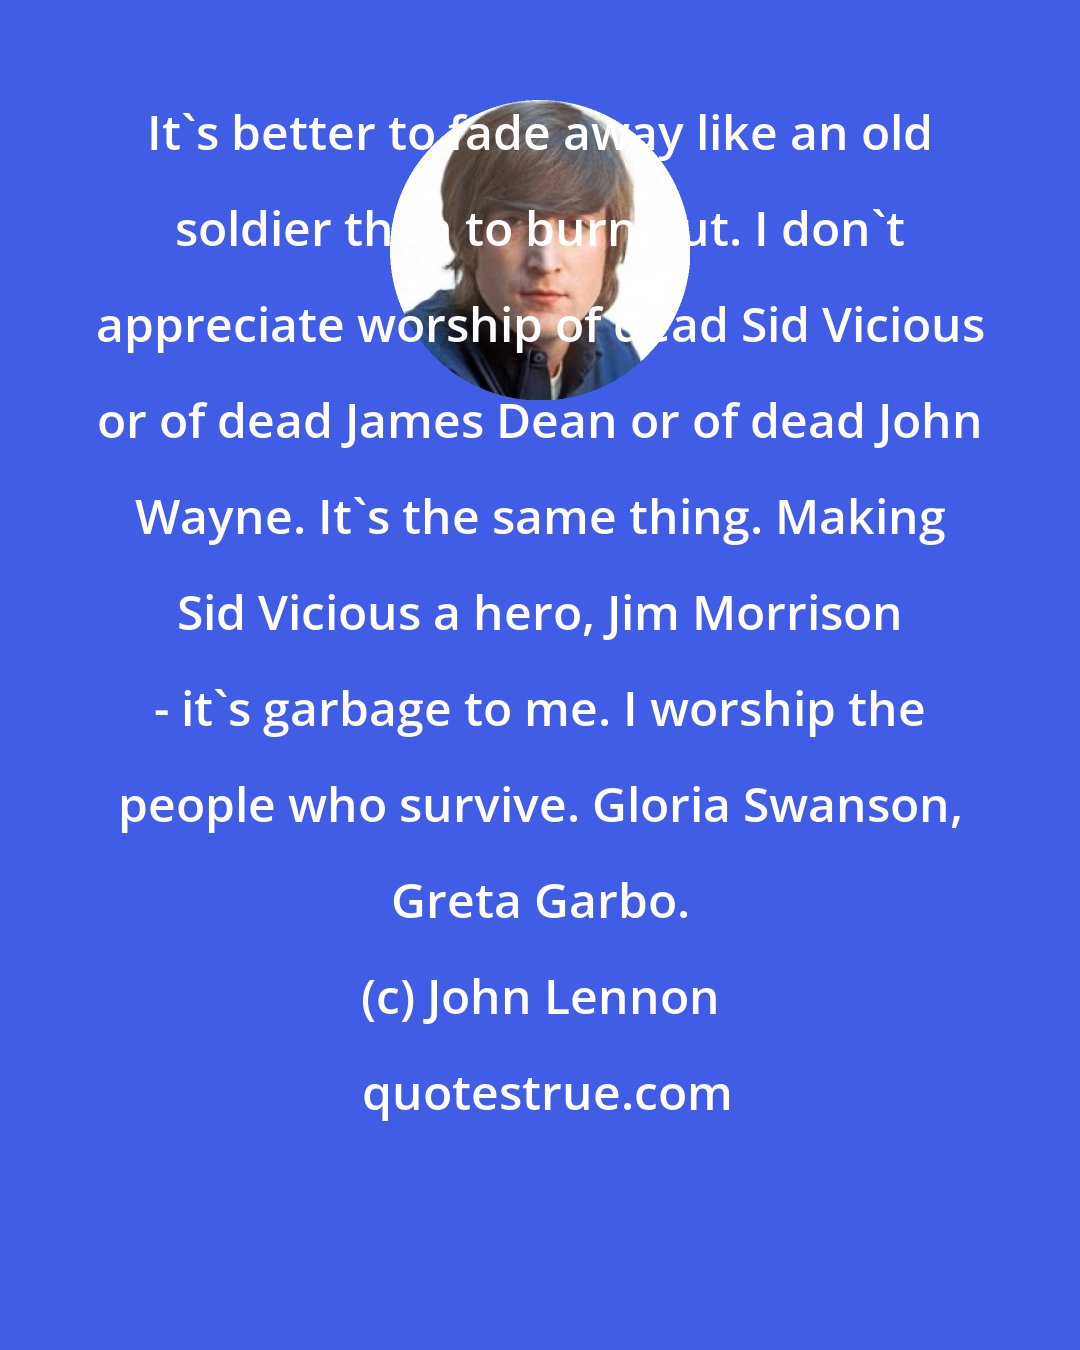 John Lennon: It's better to fade away like an old soldier than to burn out. I don't appreciate worship of dead Sid Vicious or of dead James Dean or of dead John Wayne. It's the same thing. Making Sid Vicious a hero, Jim Morrison - it's garbage to me. I worship the people who survive. Gloria Swanson, Greta Garbo.